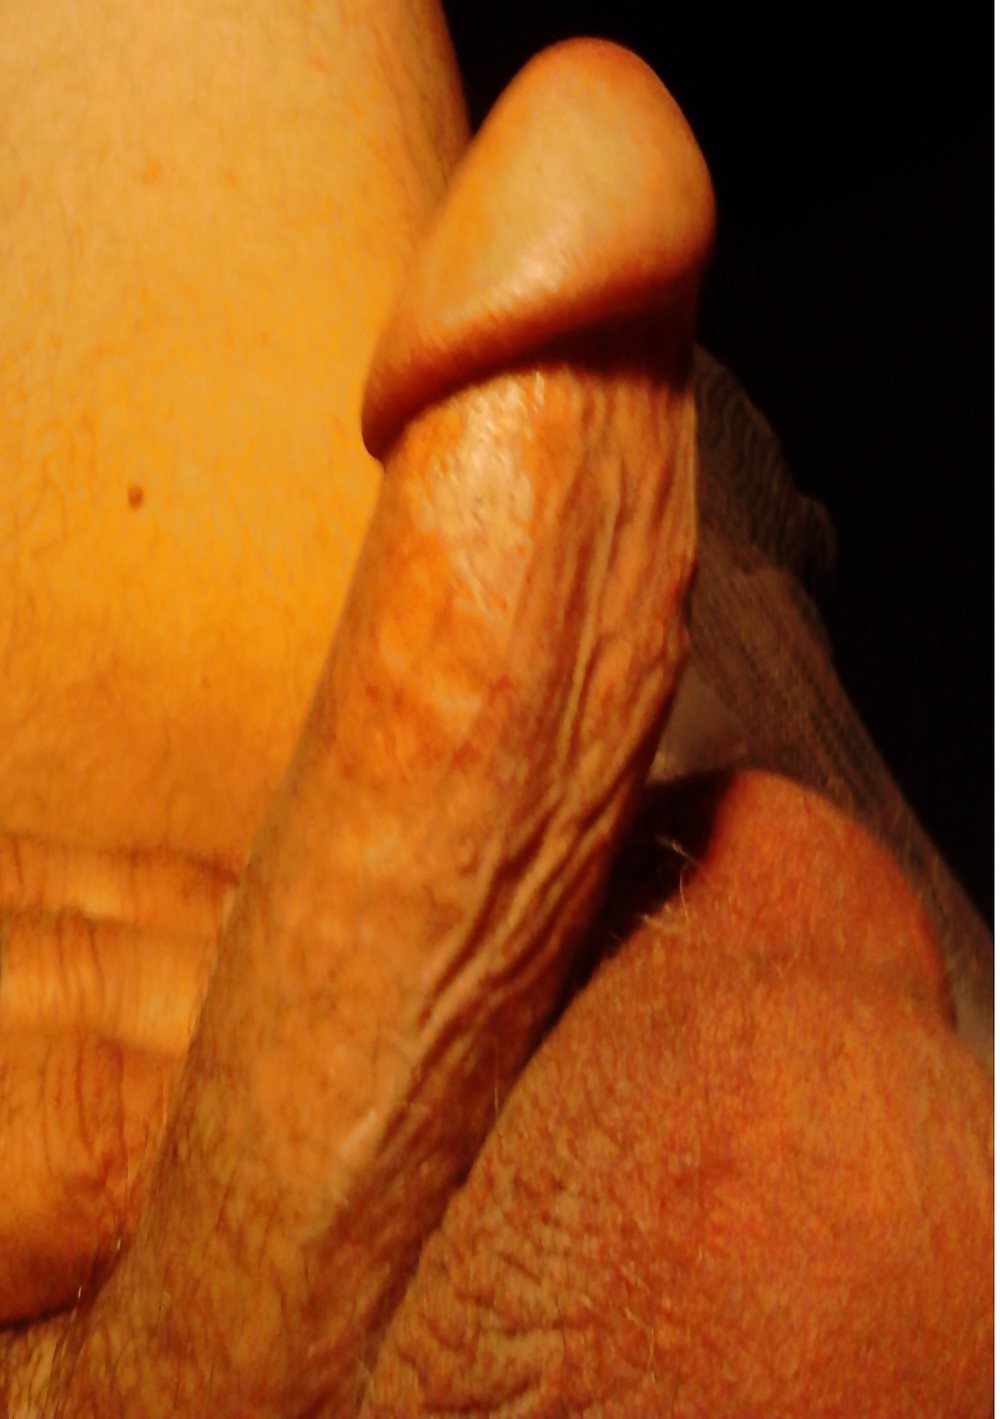 Here Is My Cock At Chin Level Suck Me Dry Bitch! #37005737